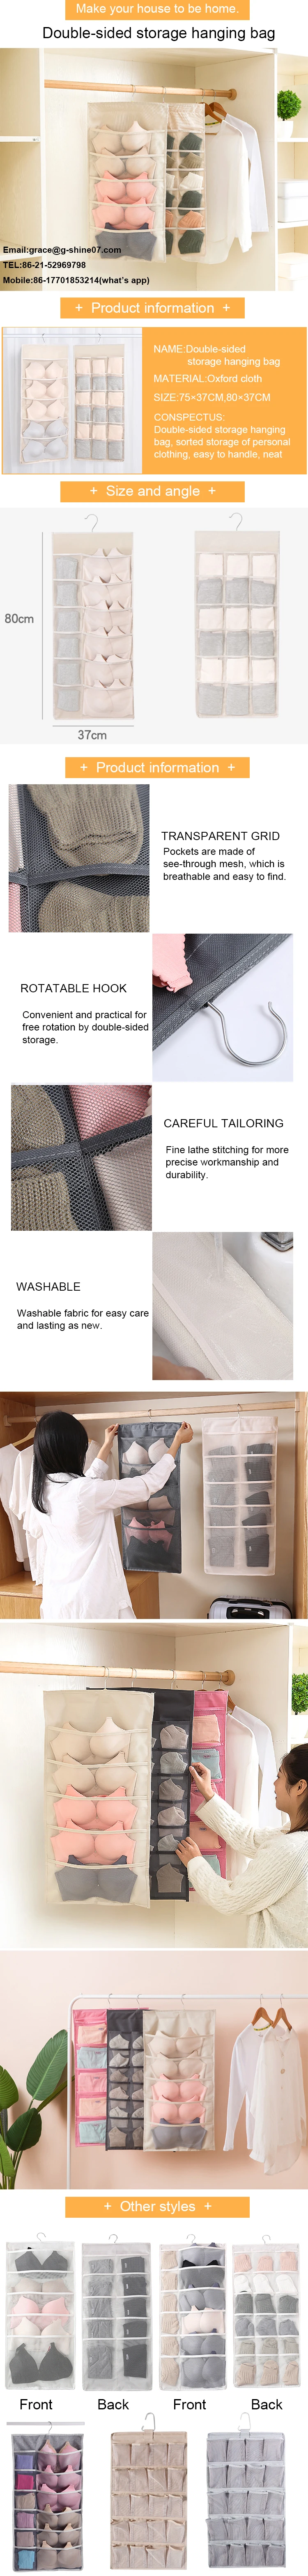 2021 Blast Product Foldable Multipockets Design Double-Sided Storage Hanging Bag For Underwear Cloth Organizer